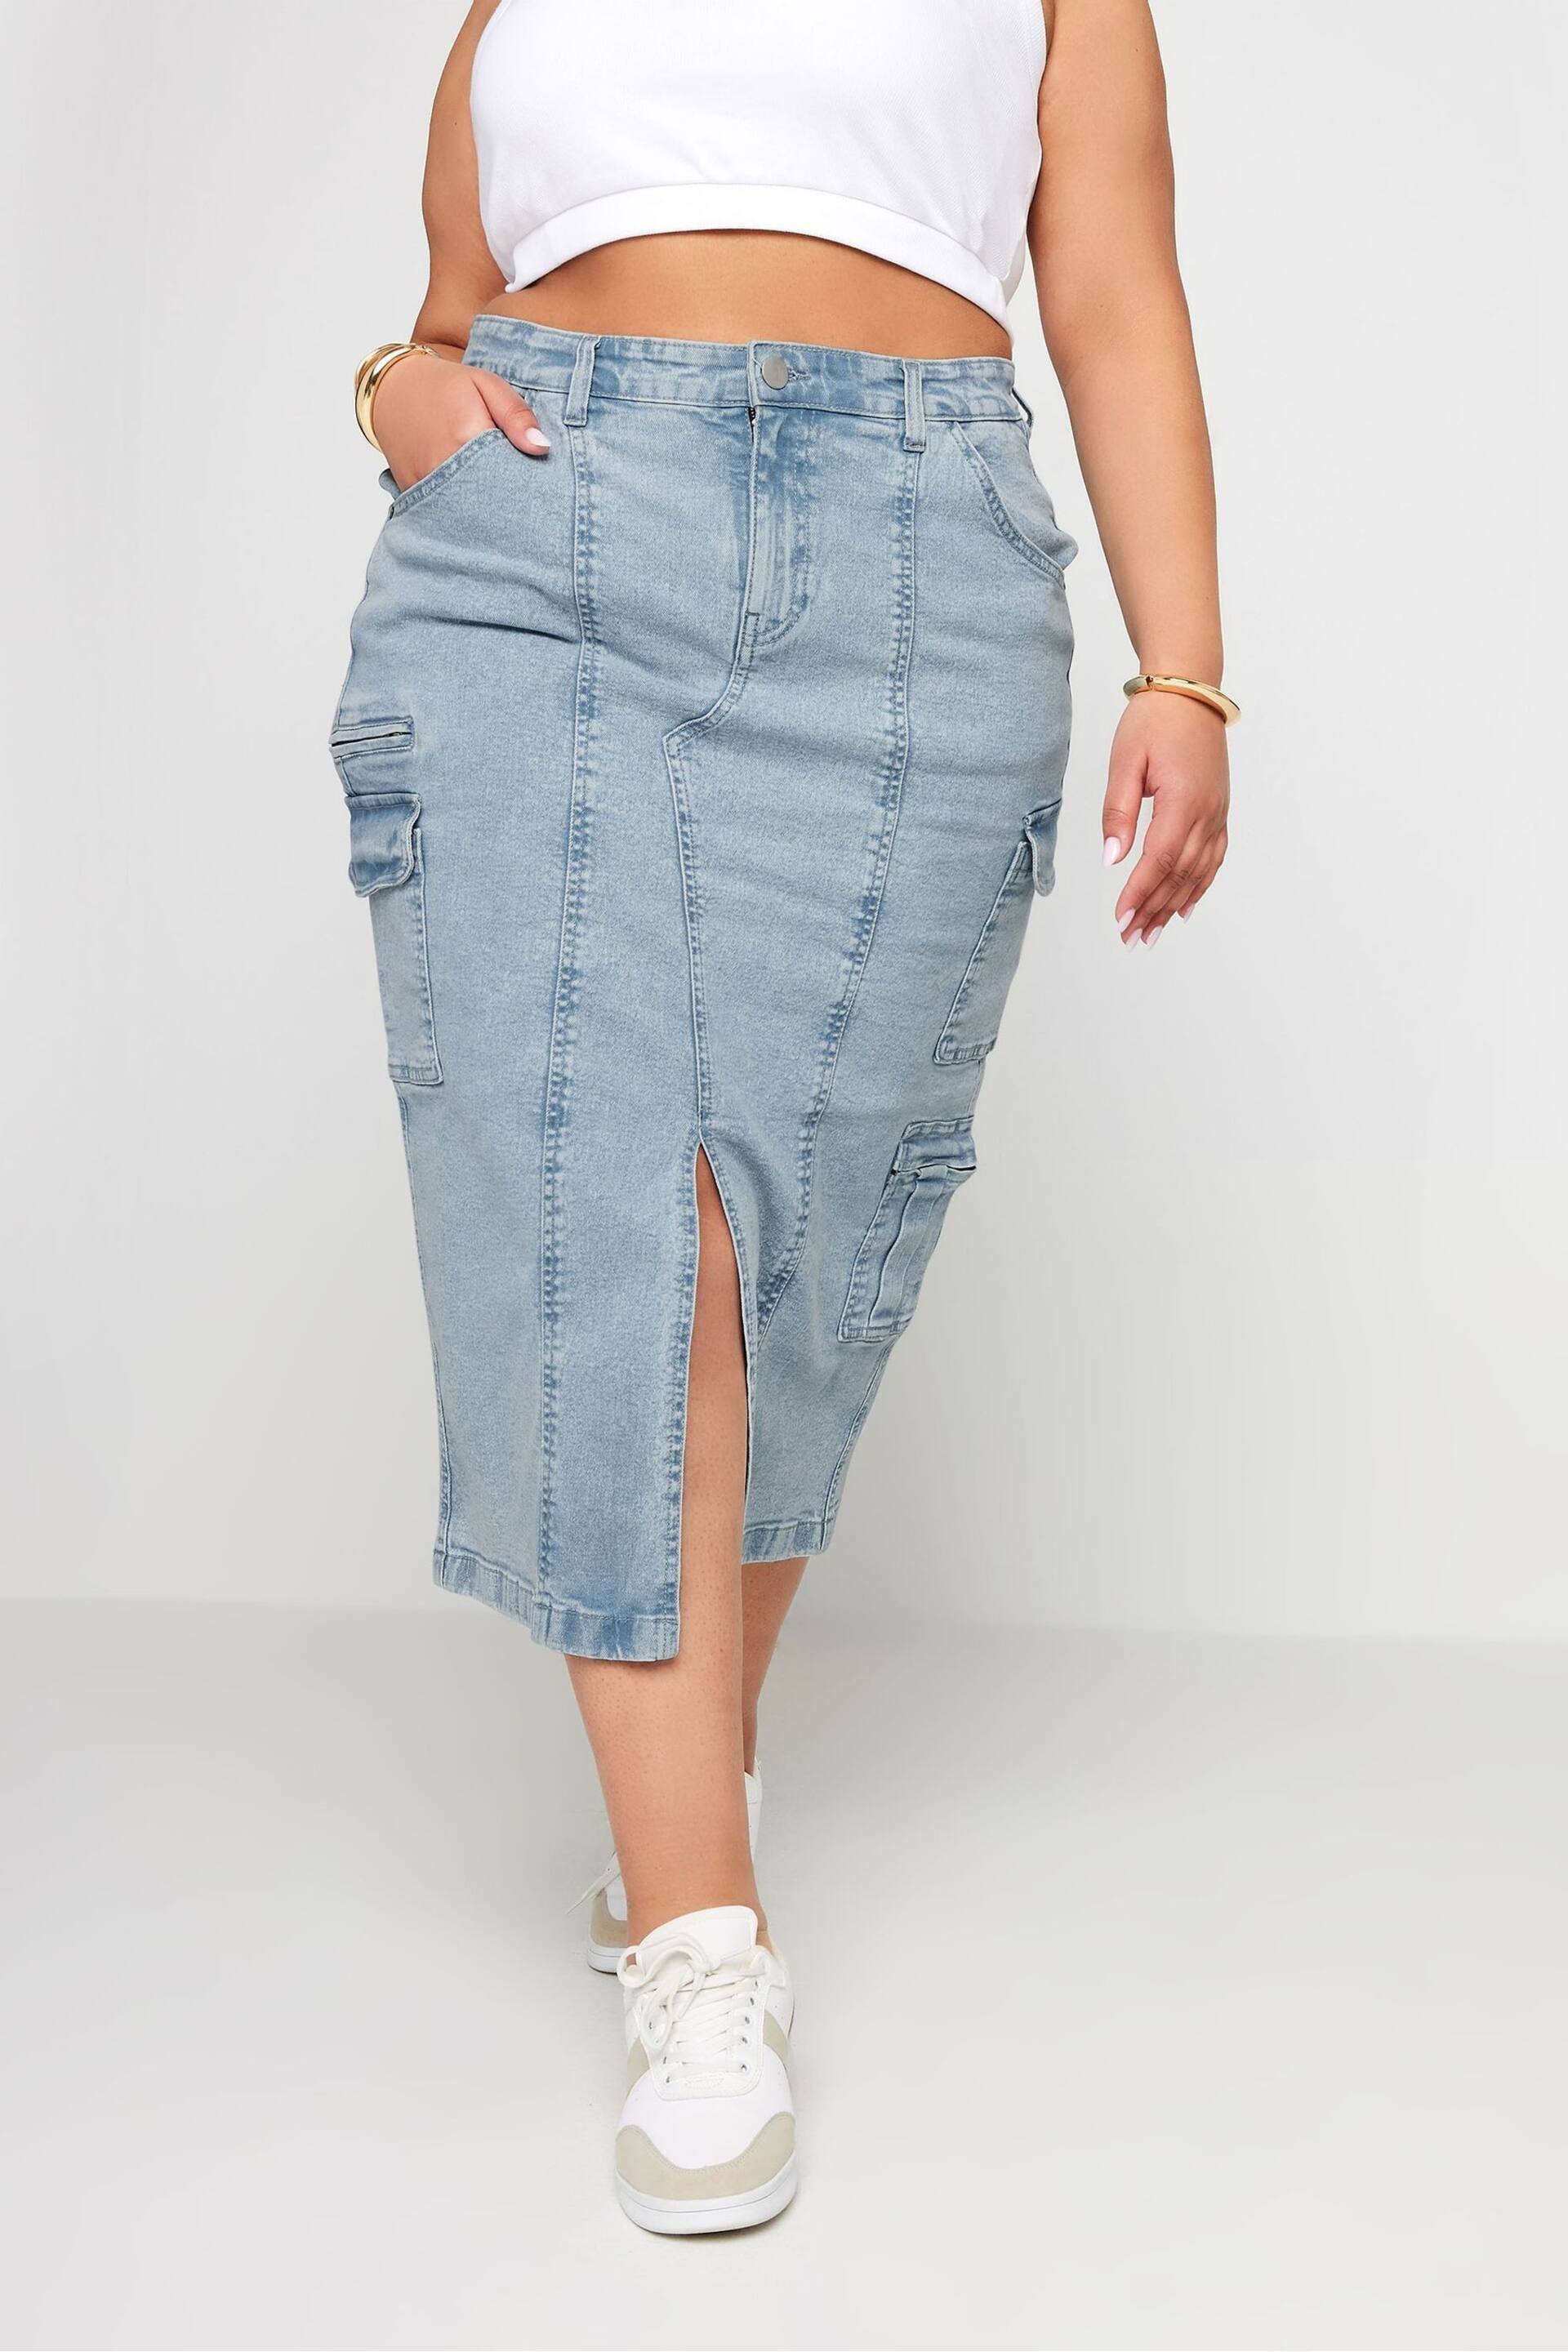 Yours Curve Blue Maxi Zip Skirt - Image 1 of 4